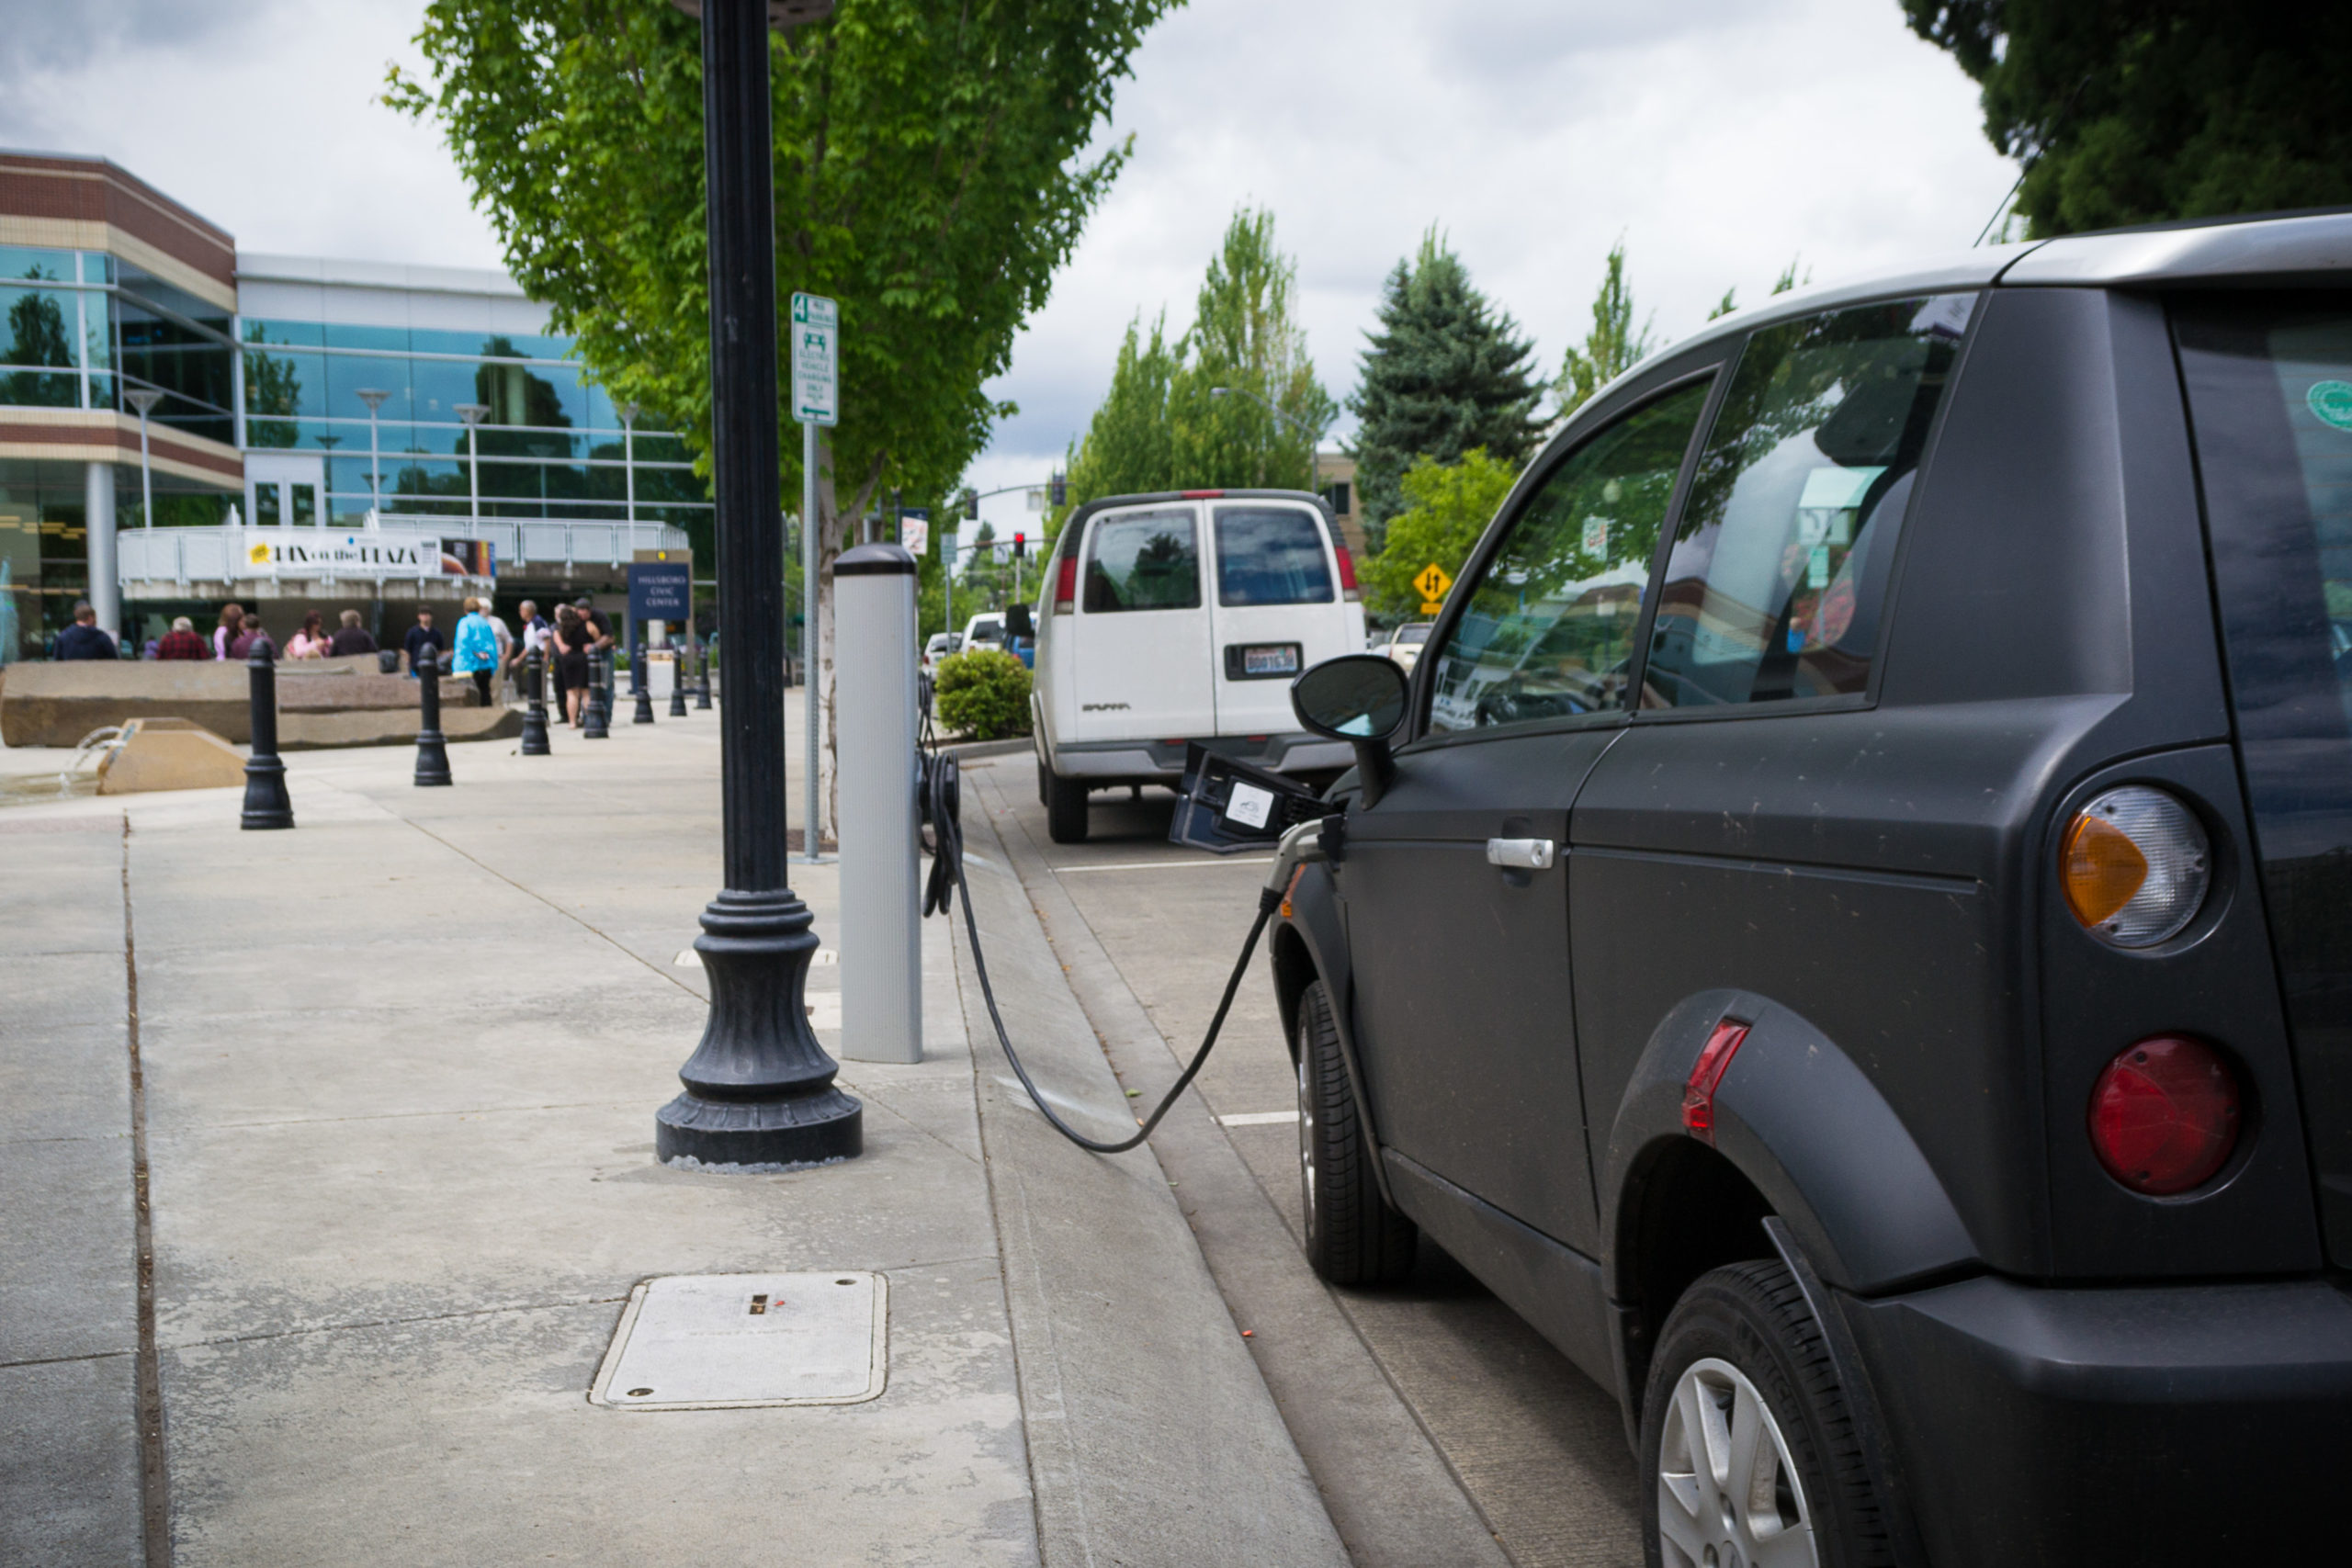 Europe and North America to connect 7.9 million EV chargers by 2025